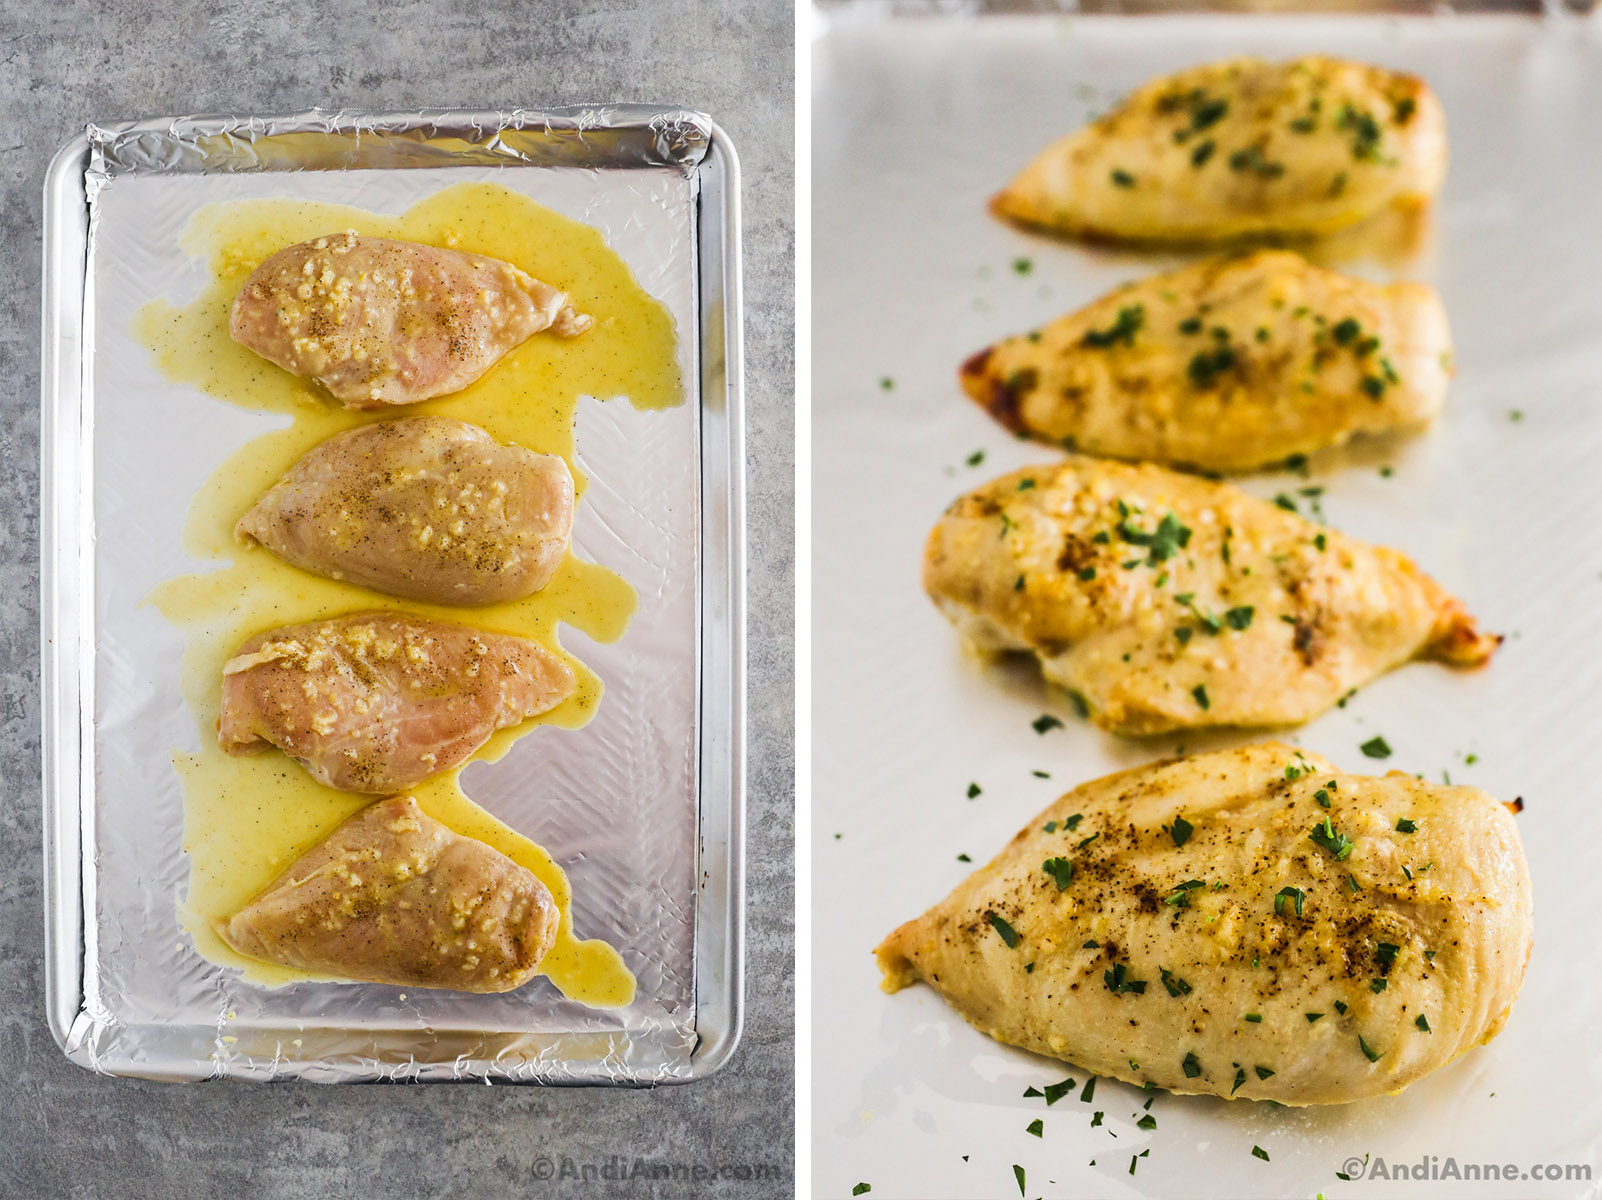 Two images, first is four lemon garlic marinted chicken breasts on a baking sheet. Second is baked chicken on baking sheet.